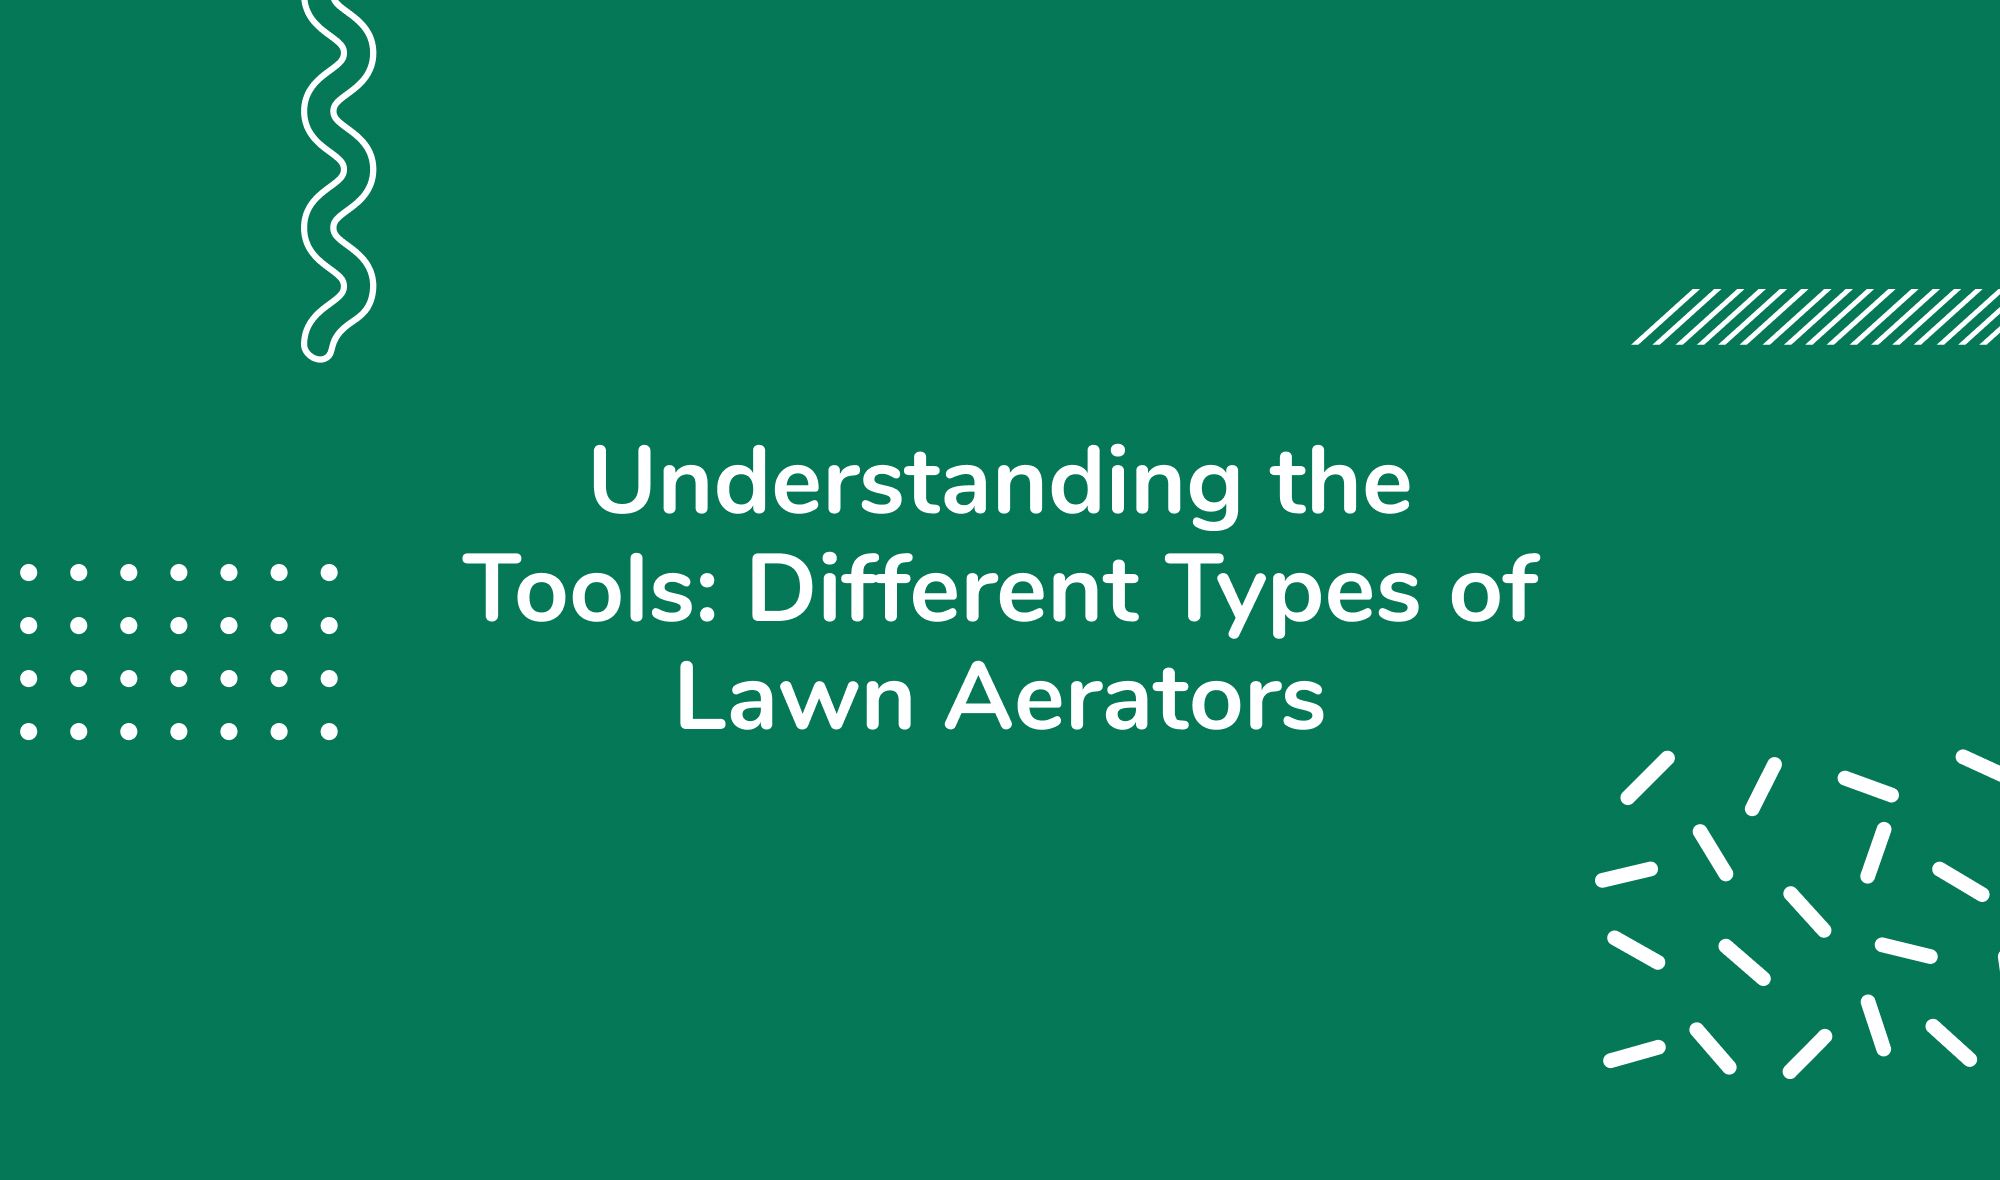 Understanding the Tools: Different Types of Lawn Aerators